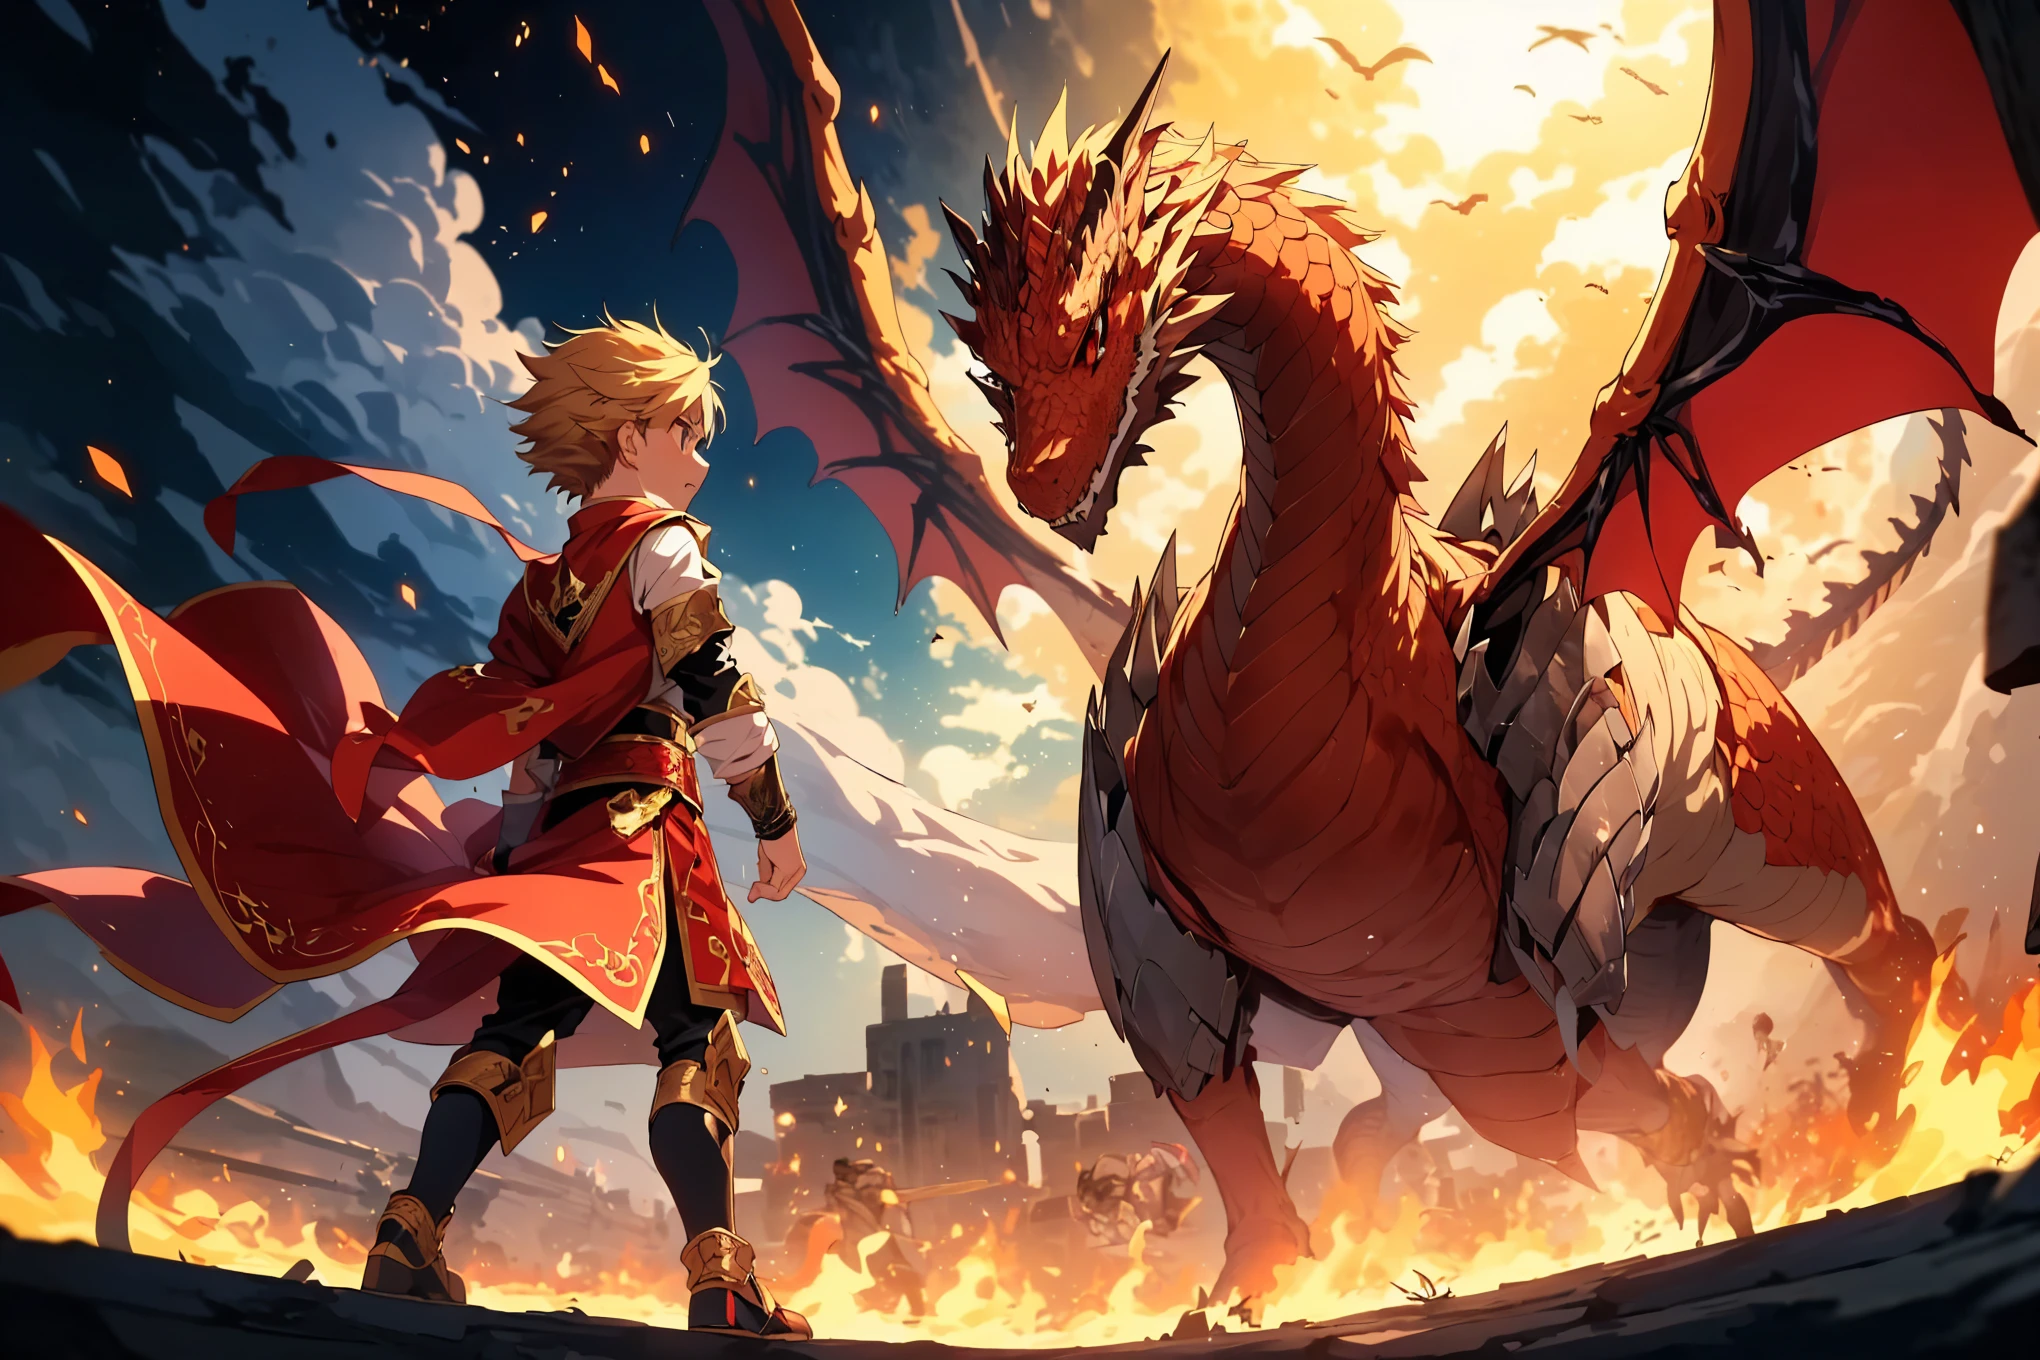 An anime-style illustration of a blond, red-eyed boy wearing ornate red and gold armor as he confronts a huge and threatening dragon. The dragon has shimmering scales and is positioned opposite the boy. The background is a dramatic battlefield with flames and smoke, creating an intense and epic atmosphere. The style should be vibrant and dynamic, typical of action-packed anime scenes. The composition should be wide to emphasize the confrontation between the boy and the dragon.(detailed eyes),detailed skin,(masterpiece,best quality:1.4),Top Quality,High quality,Ultra detailed,insanely detailed,anime style